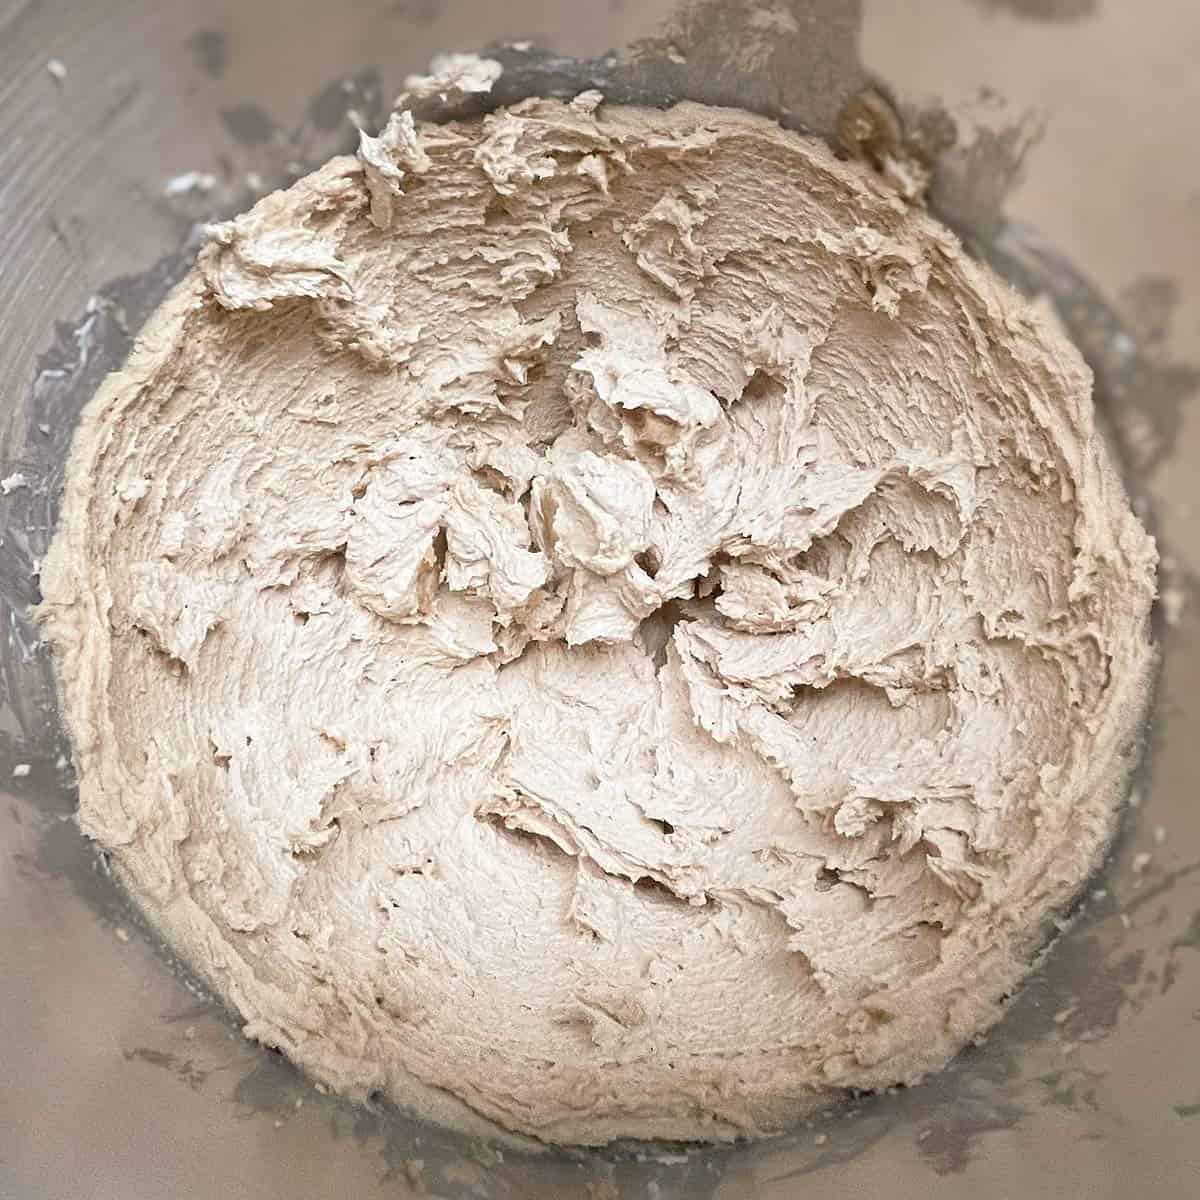 Cookie dough with everything but the dry ingredients, looks creamy.